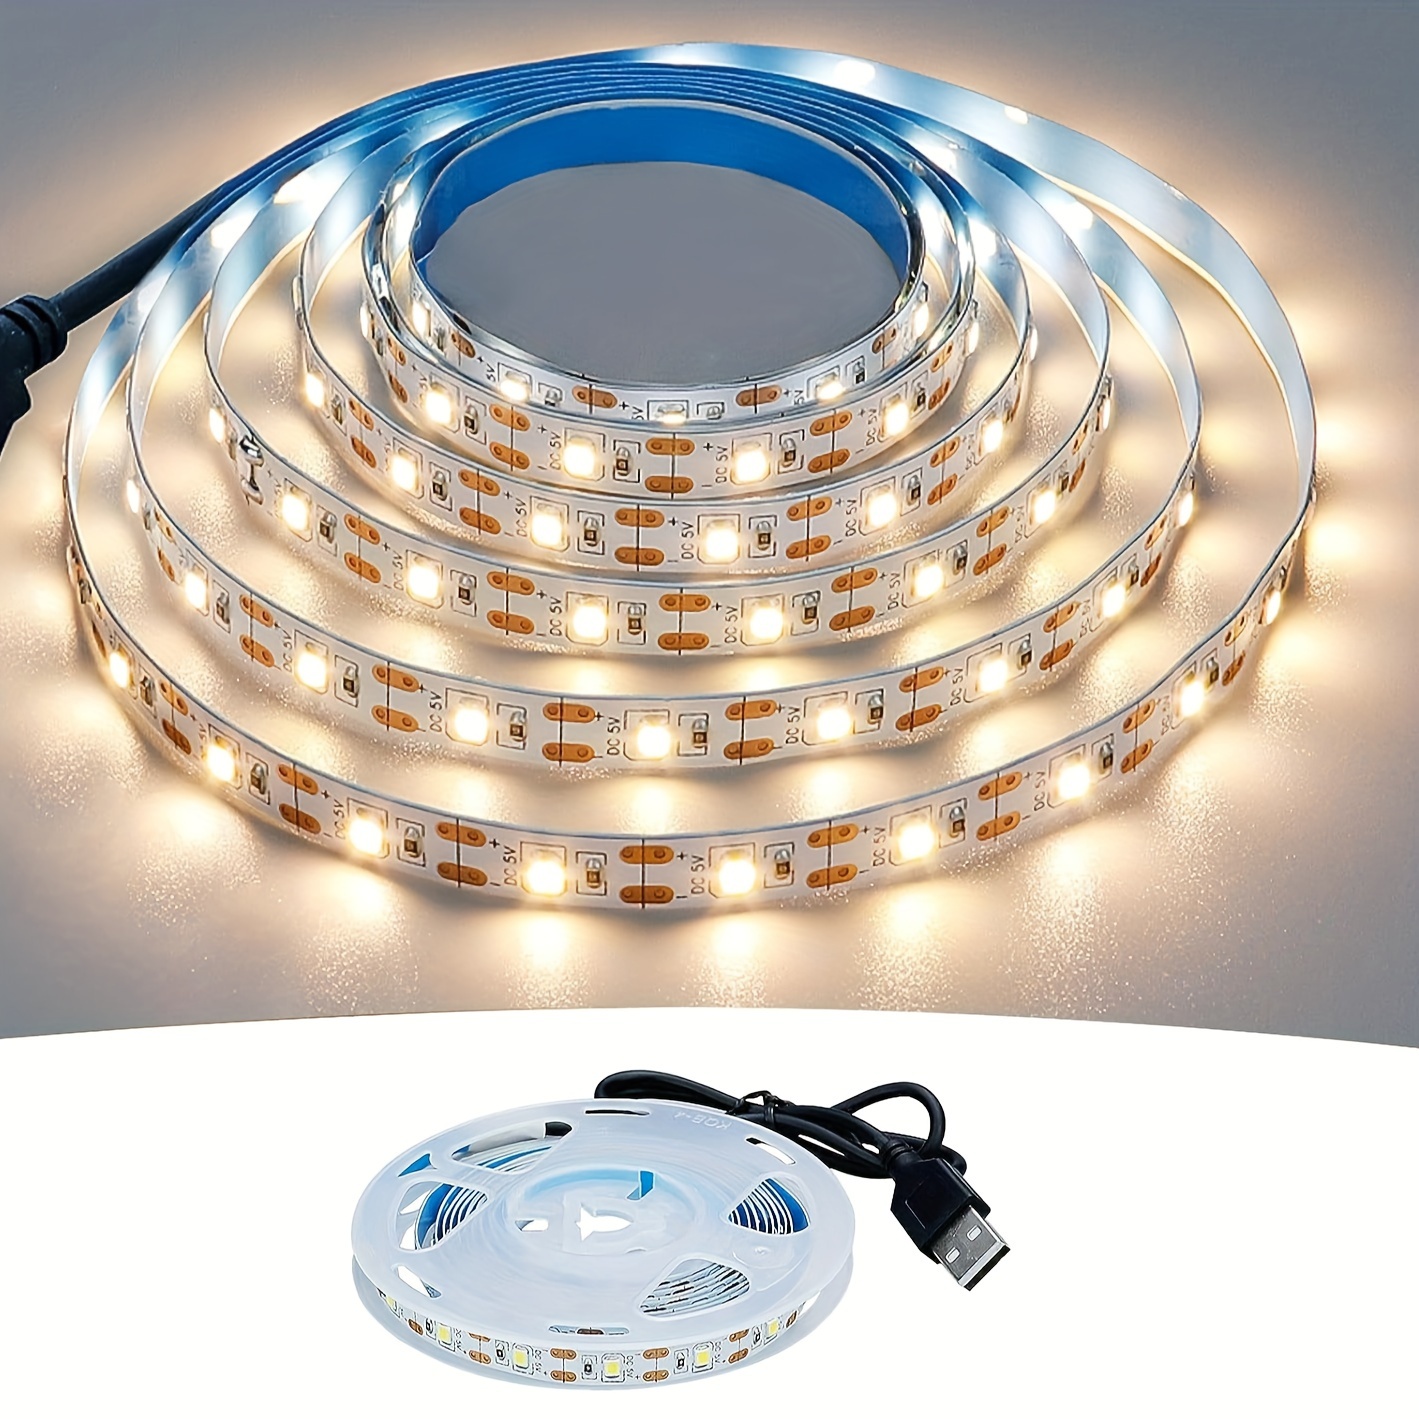 3.3 ft. LED Smart C0olor Changing Lightstrip Extension with Bluetooth  (1-Pack)